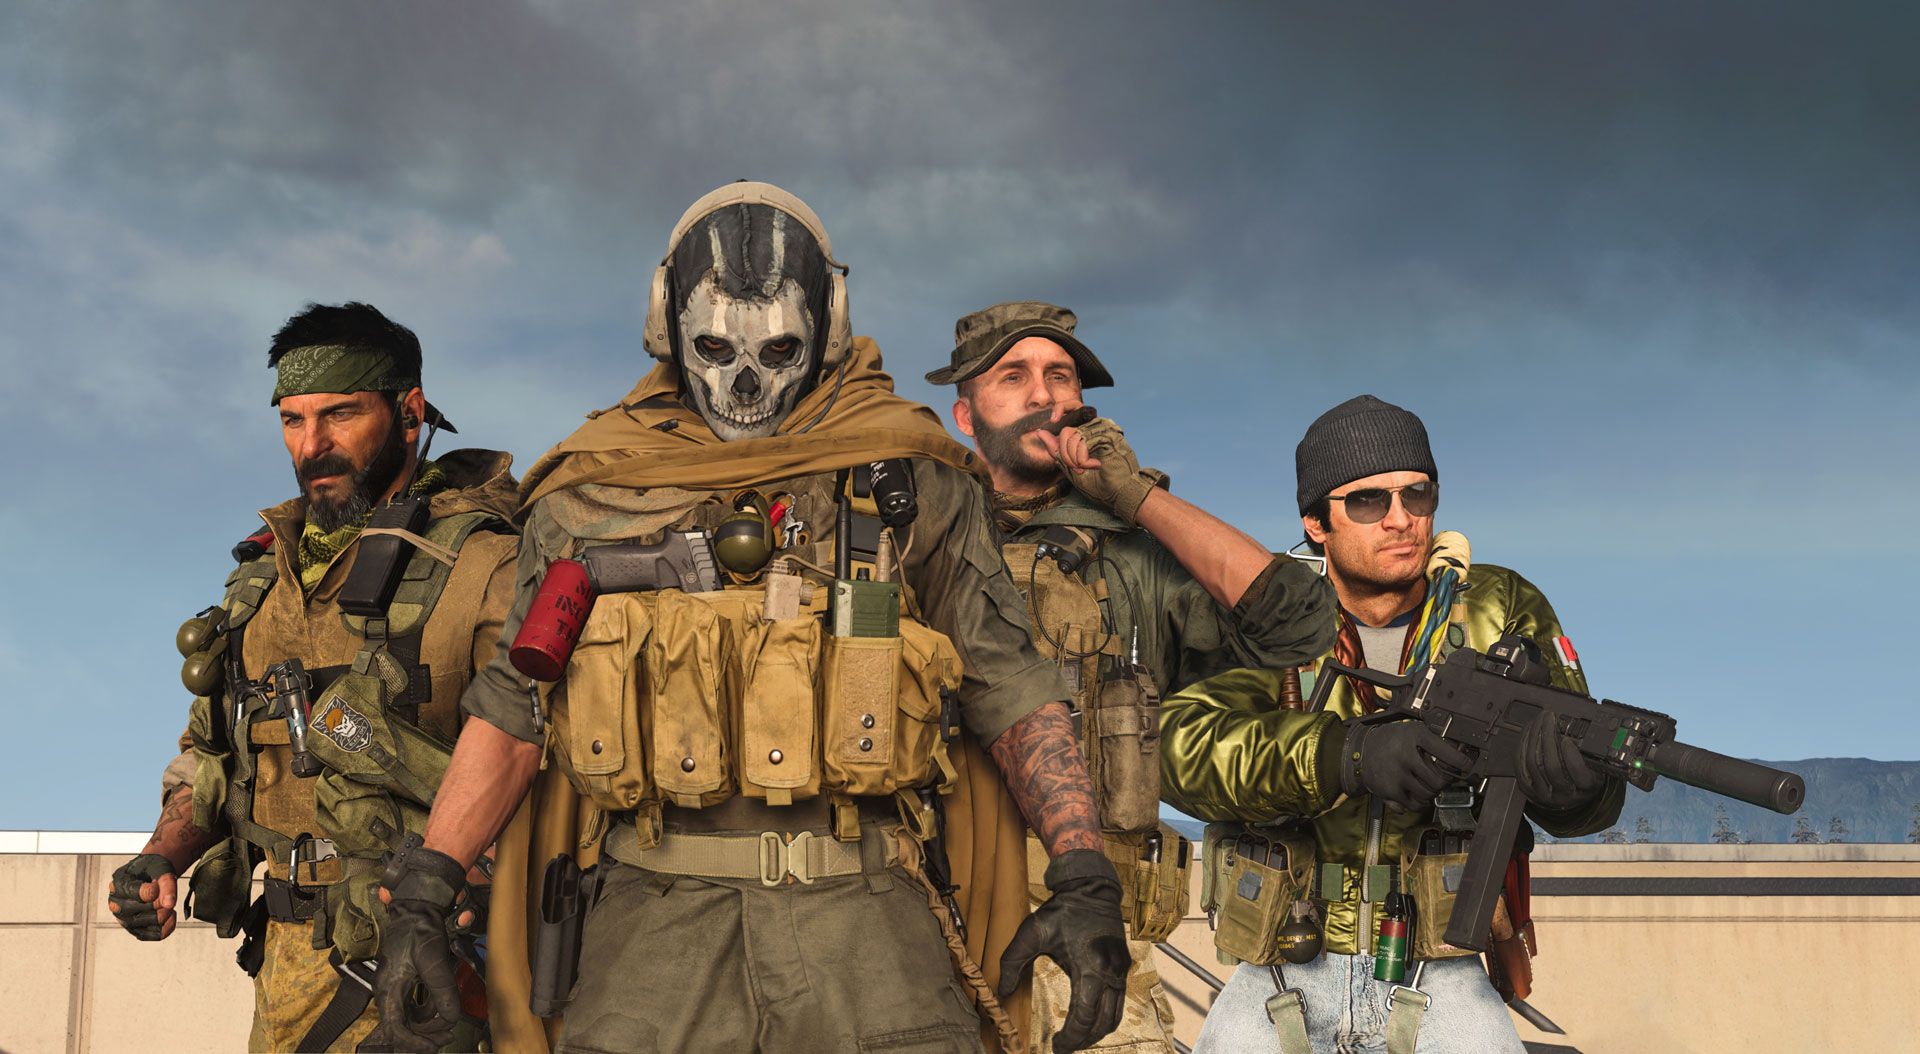 Frank Woods, Ghost, Price, and&nbsp;Adler as they appear in Call of Duty Warzone